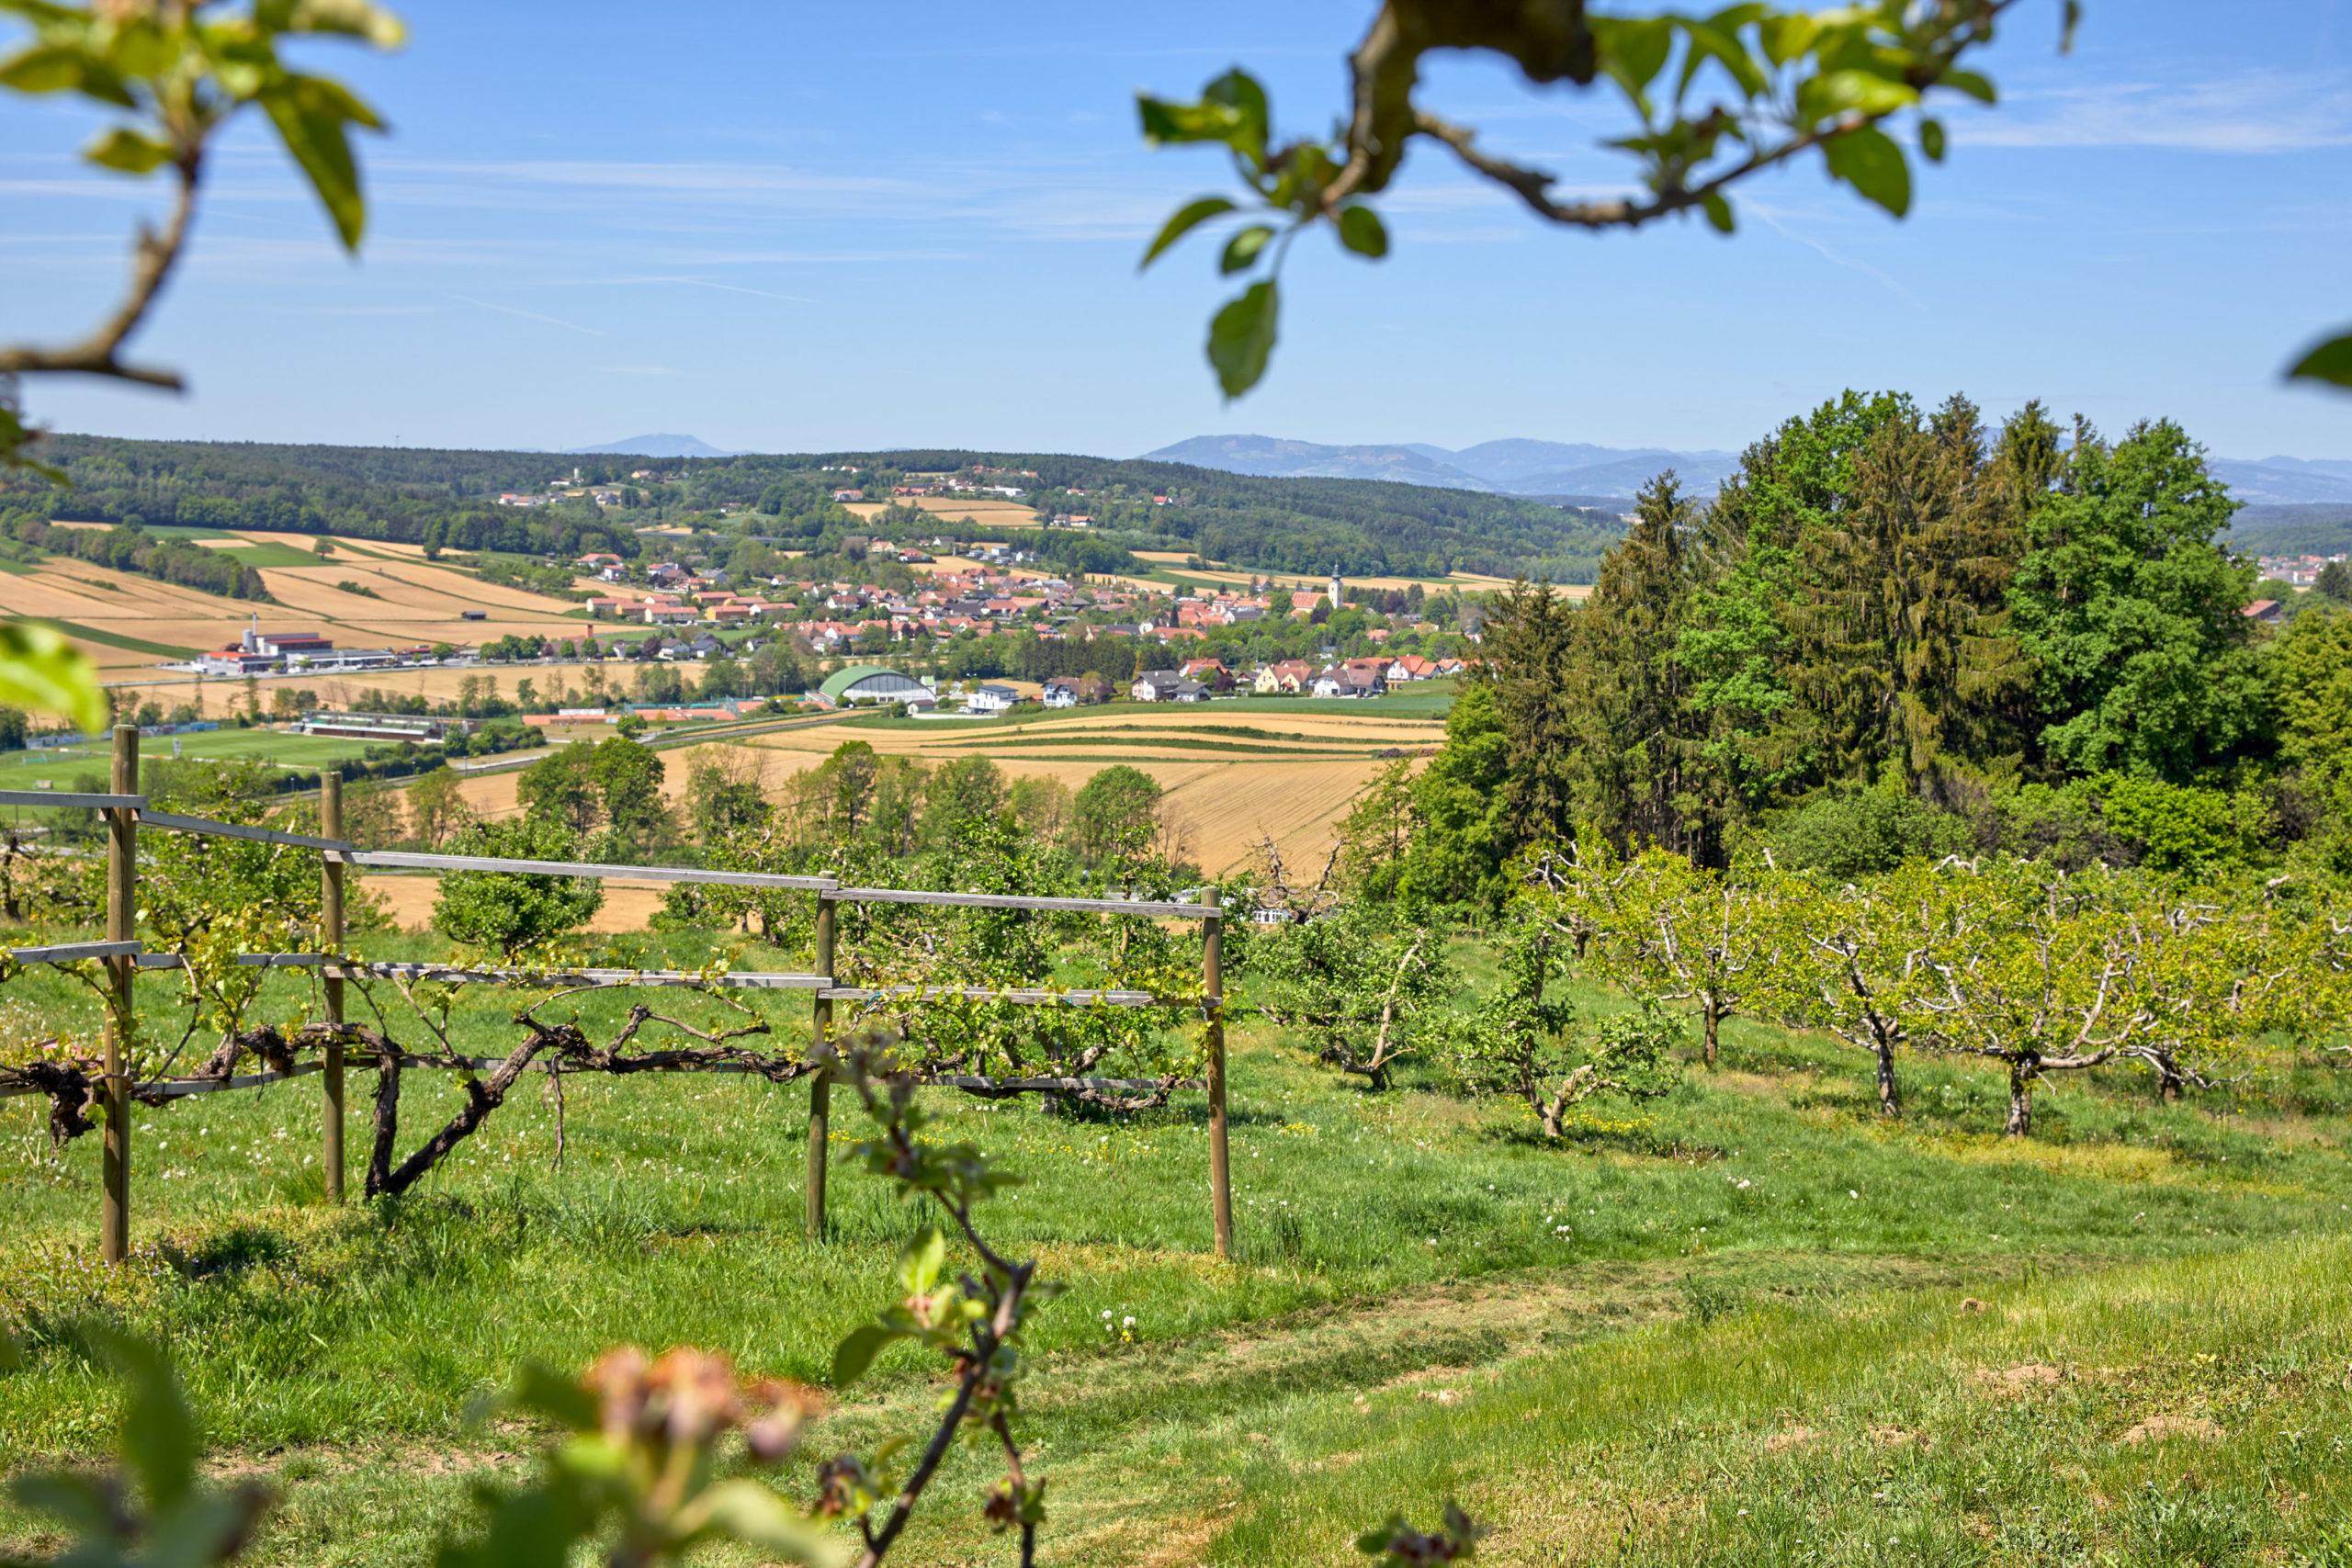 Experience variety on your Ayurvedic holiday in Styria’s Bad Waltersdorf